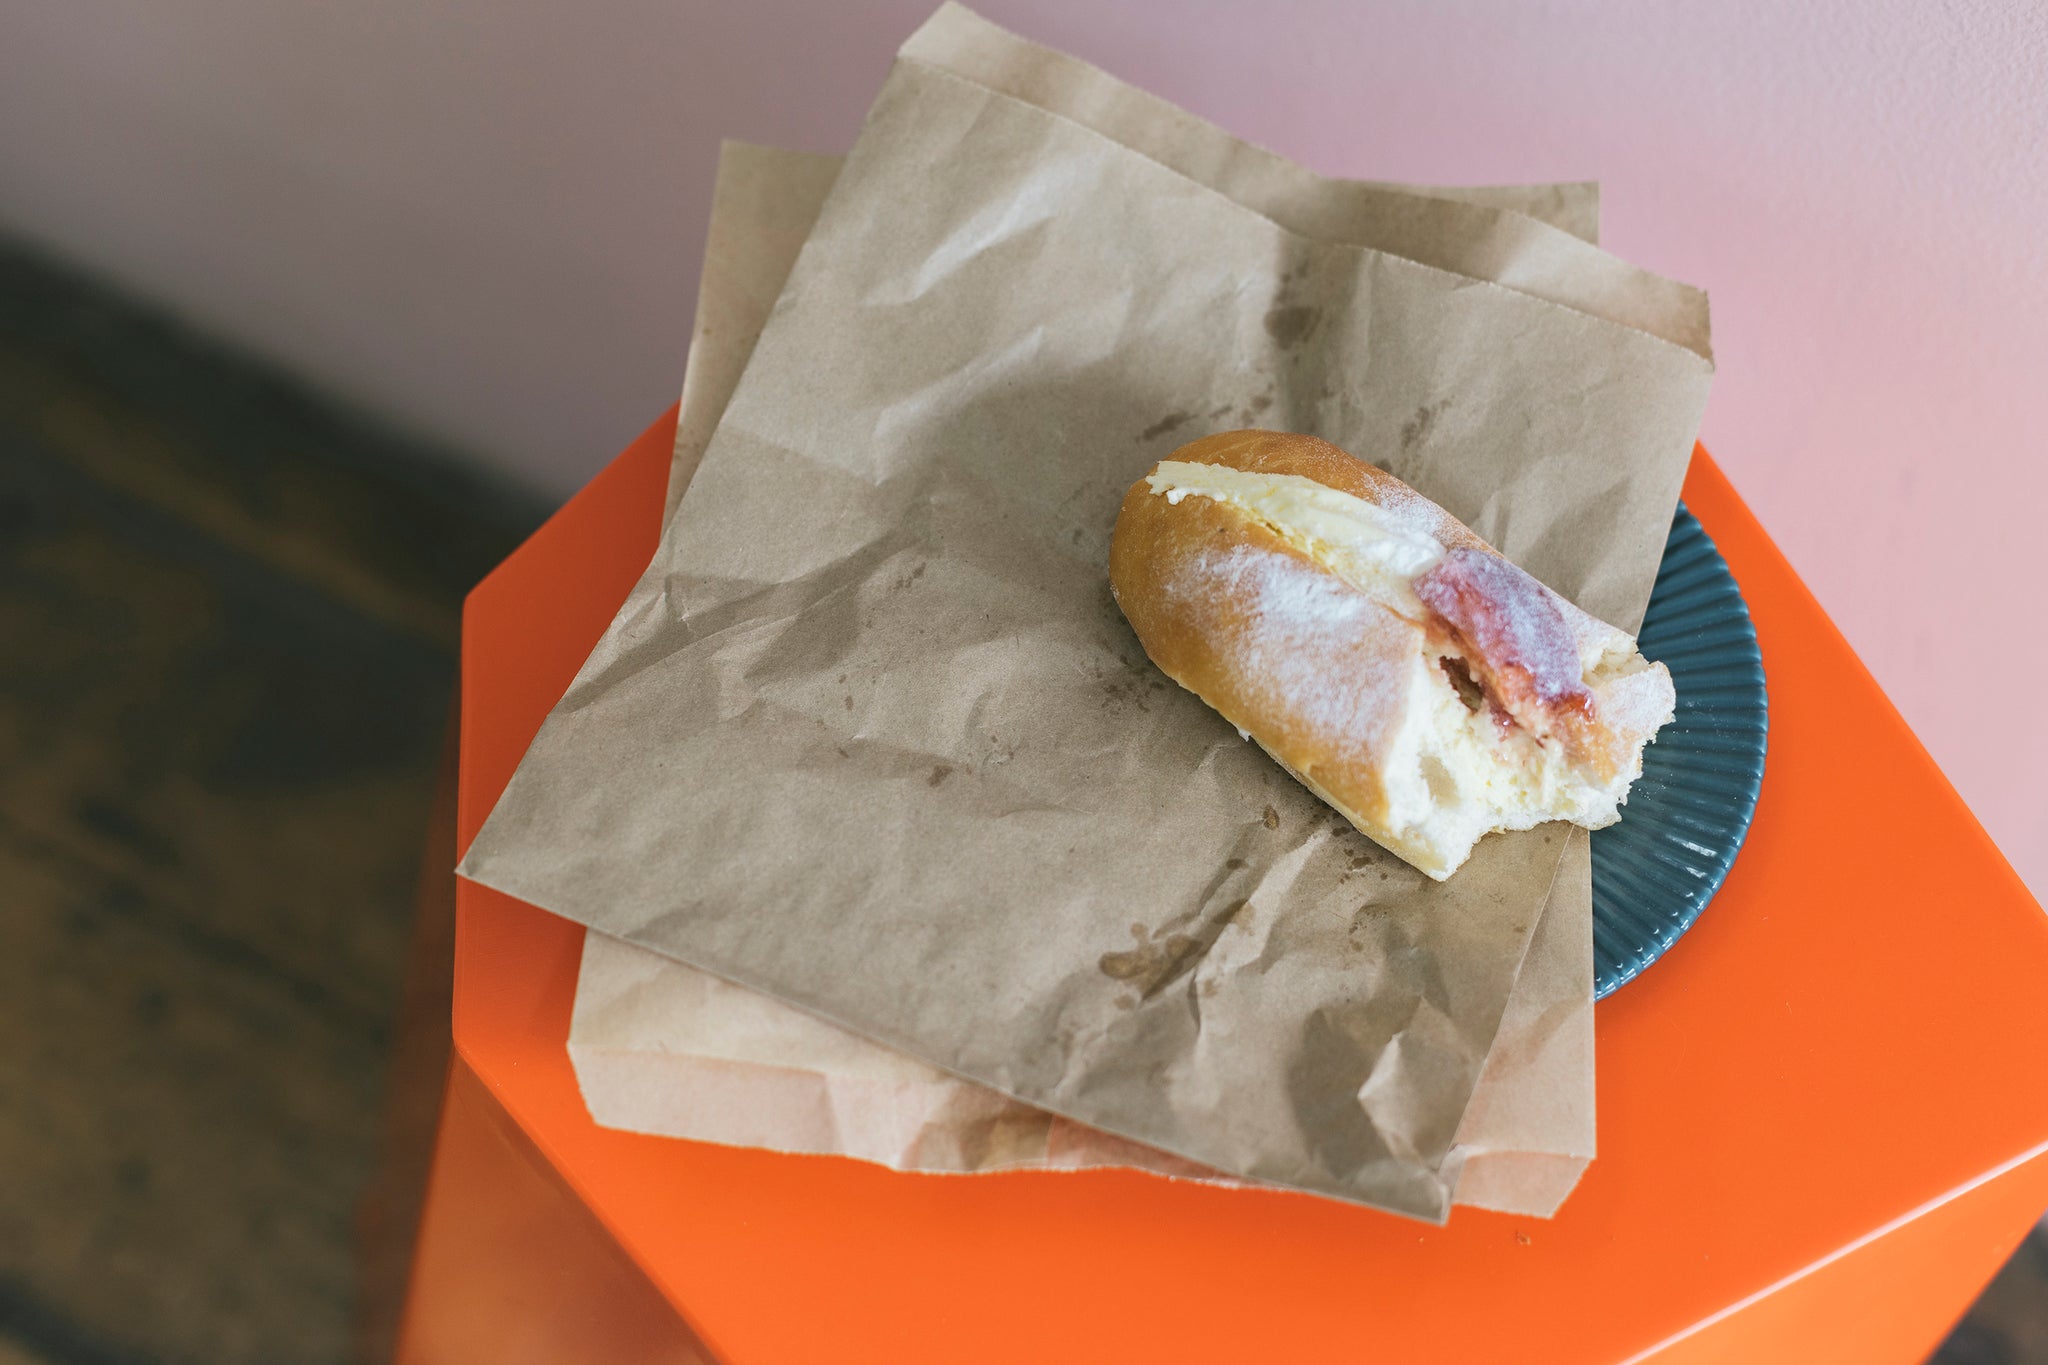 Brown paper bag placed on top of orange hexagon shaped stool. A Half eaten fresh cream donut with jam is place on top of bag. 